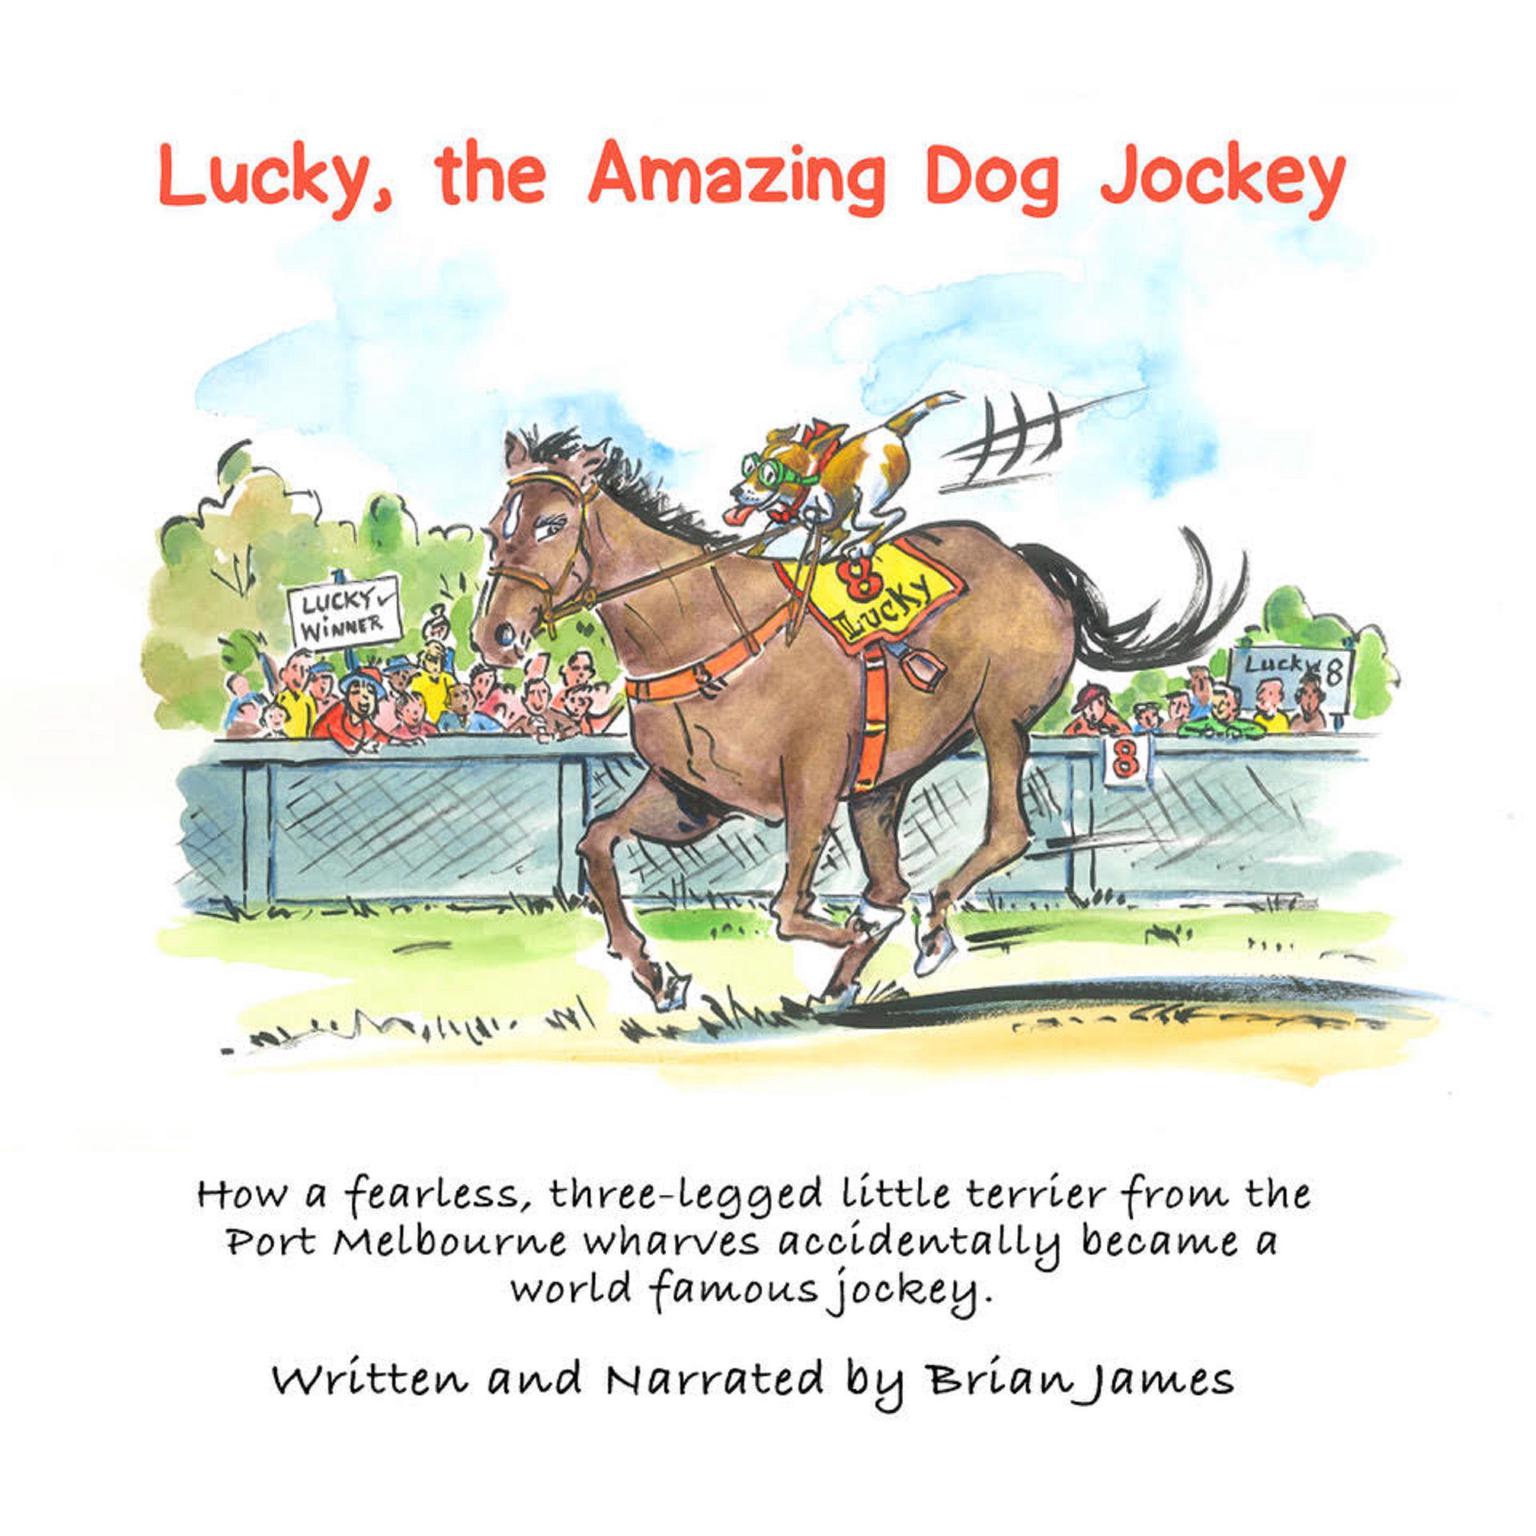 Lucky, the amazing dog jockey: How a fearless, three-legged little terrier from the Port Melbourne wharves accidentally became a world famous jockey. Audiobook, by Brian James